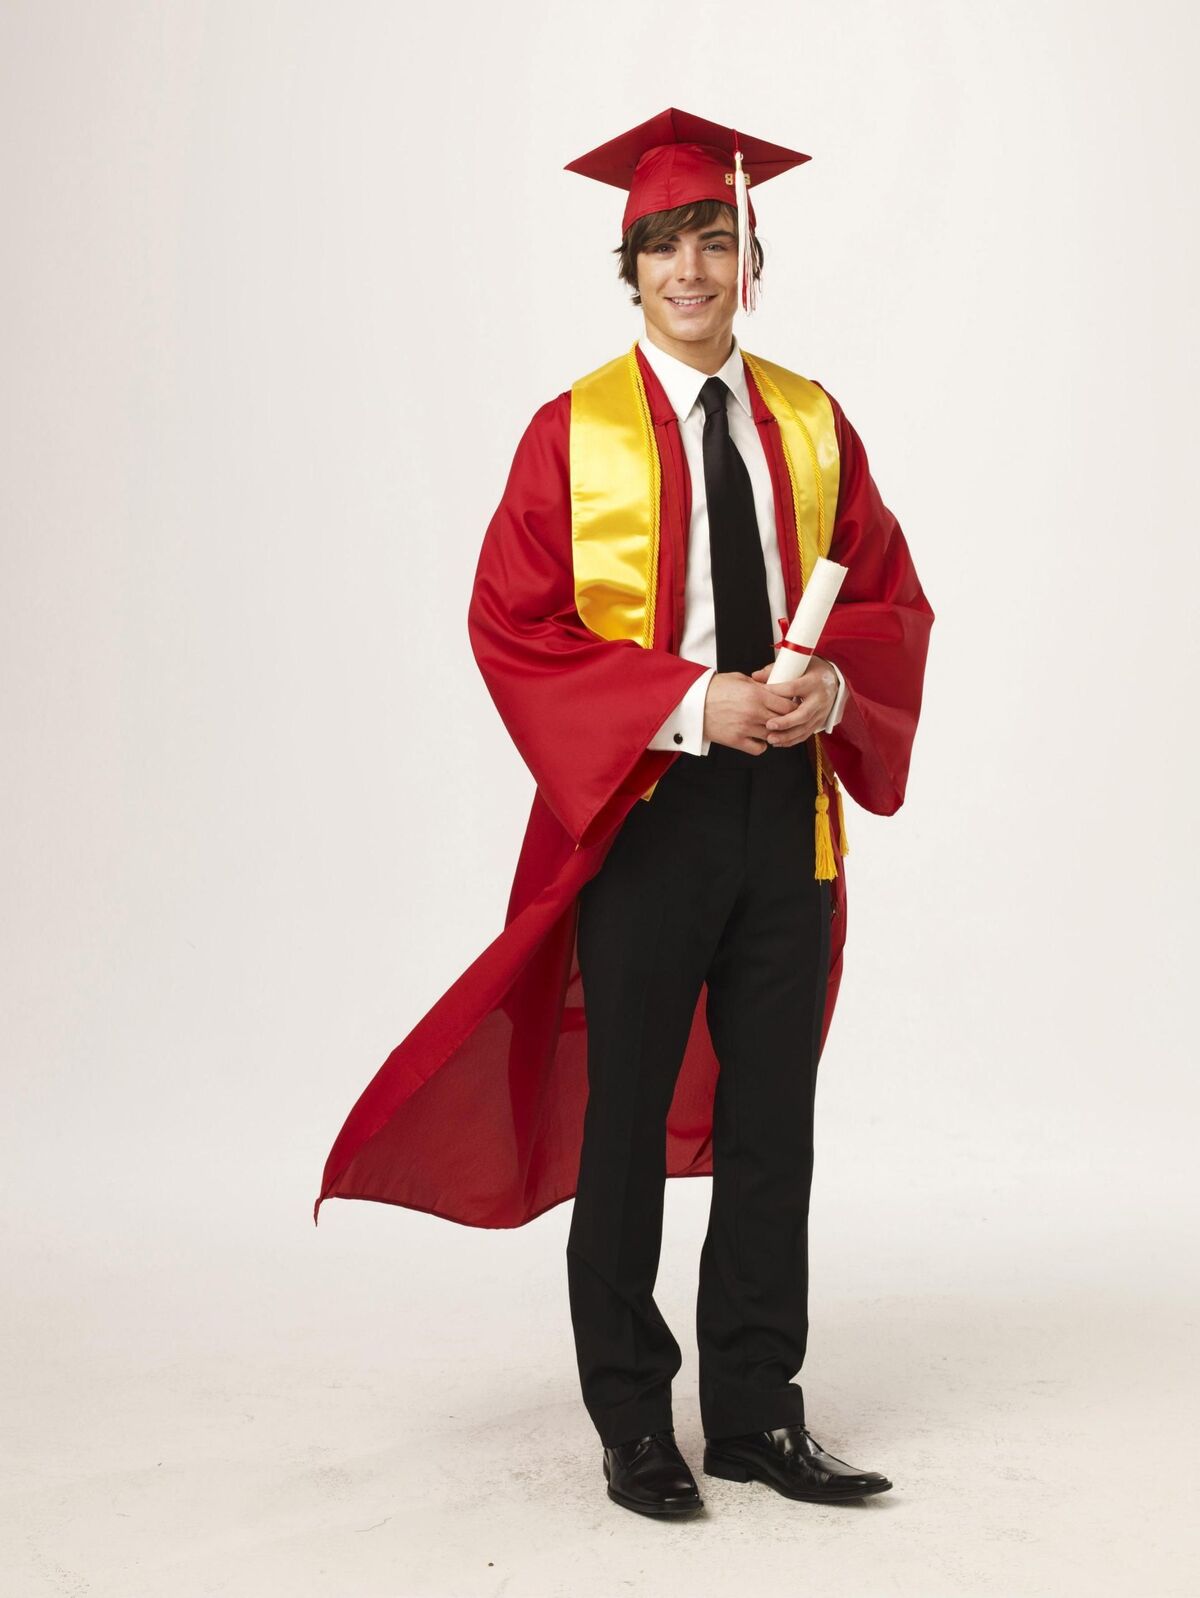 File:Convocation dress of University of Dhaka with hood, gown and cap.JPG -  Wikipedia